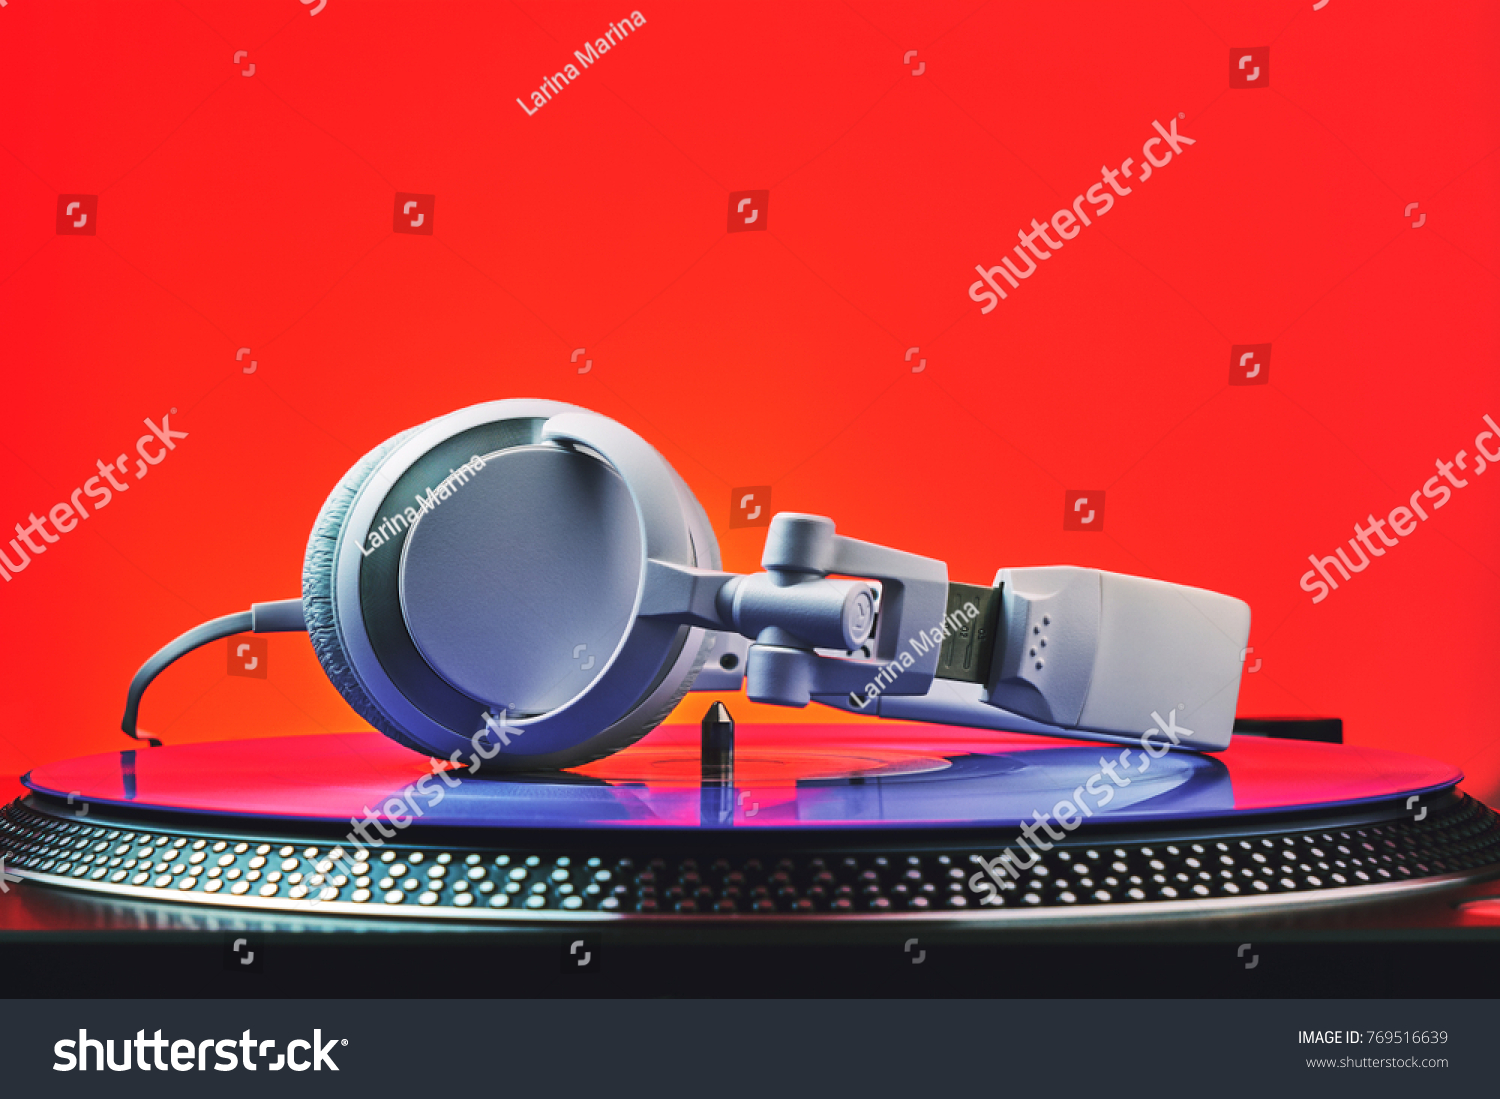 Player turntable vinyl records and white headphones in red light. Equipment for the disc jockey. Sound technology for DJ to mix and play music. Violet vinyl plate. Vinyl turntable in red light #769516639